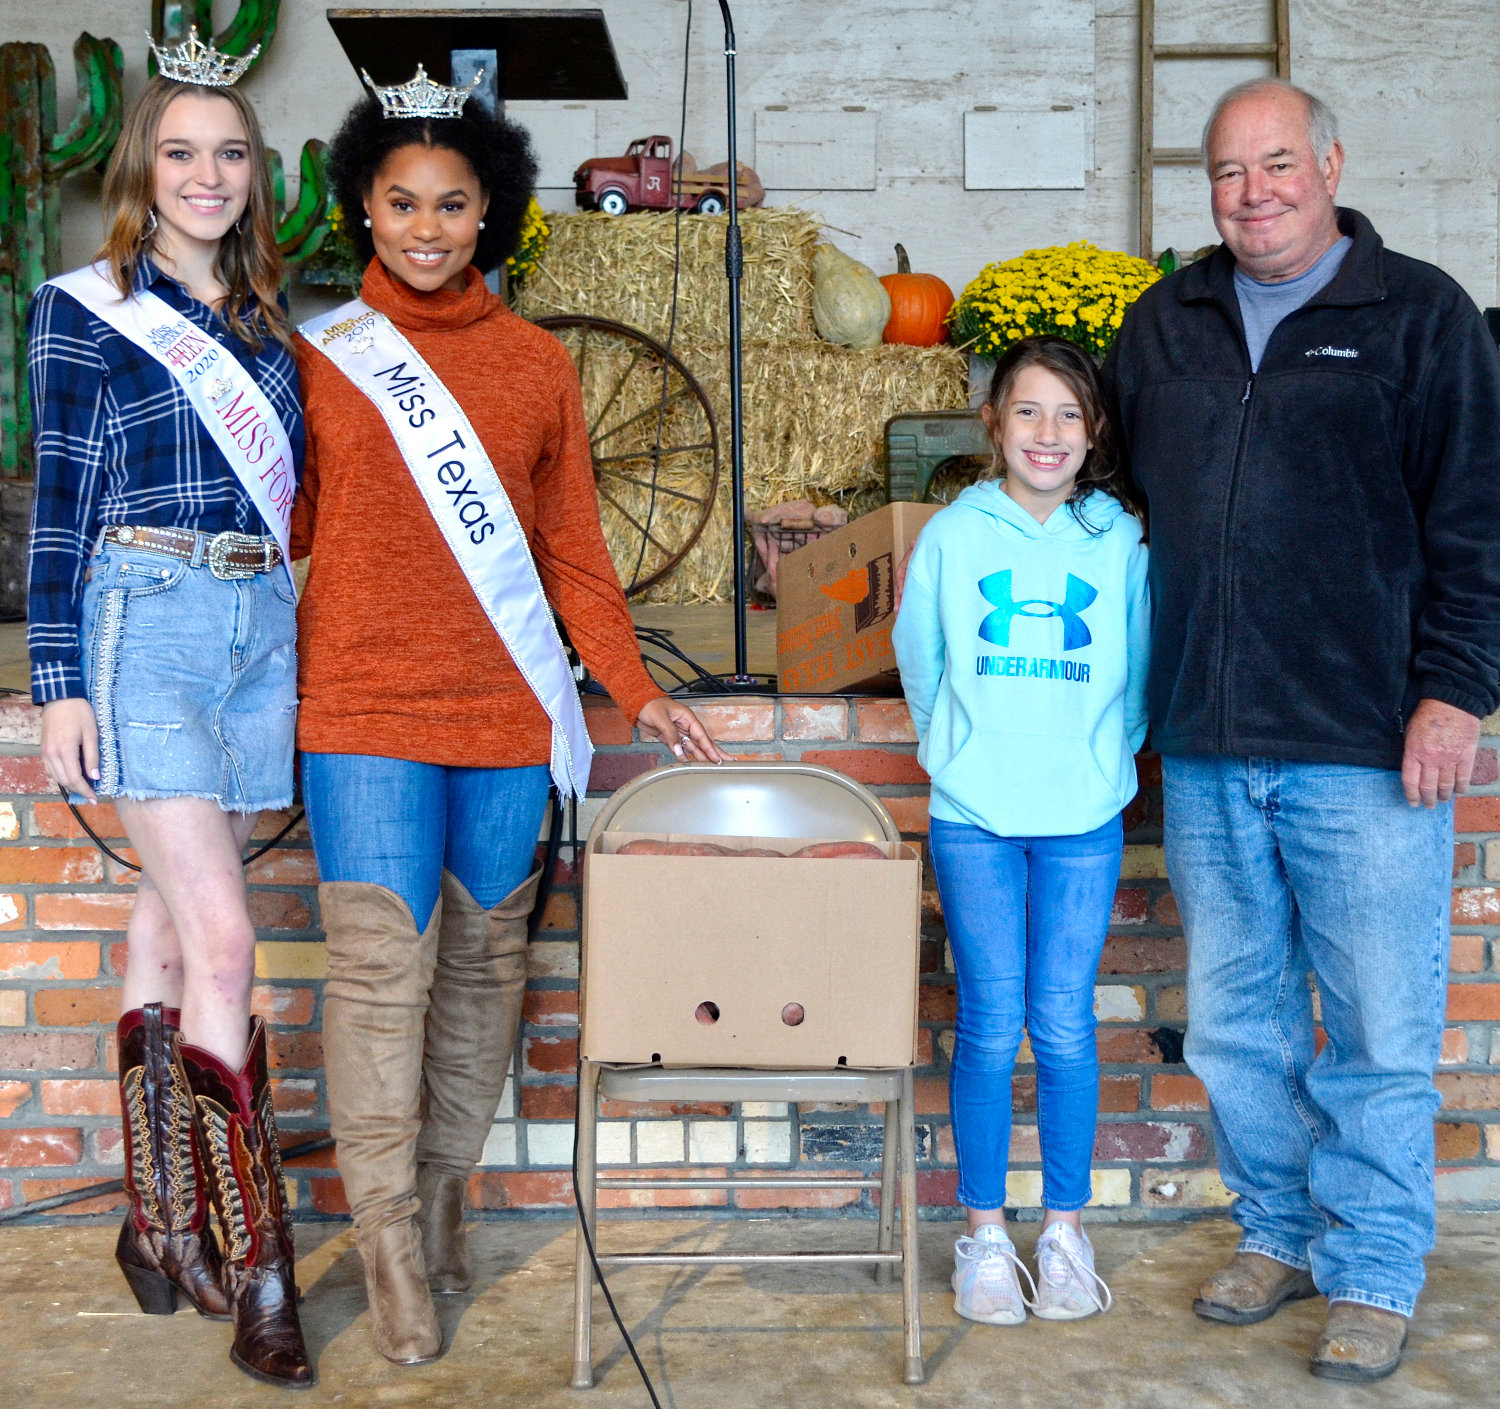 Jim and Avery Herlocker, representing Mineola Community Bank, took the highest bid on a box of Golden sweet potatoes at the annual auction Saturday. This year’s auction brought in $23,200. They are shown with Miss Texas Chandler Forman and Miss Fort Worth Outstanding Teen Celeste Lay.